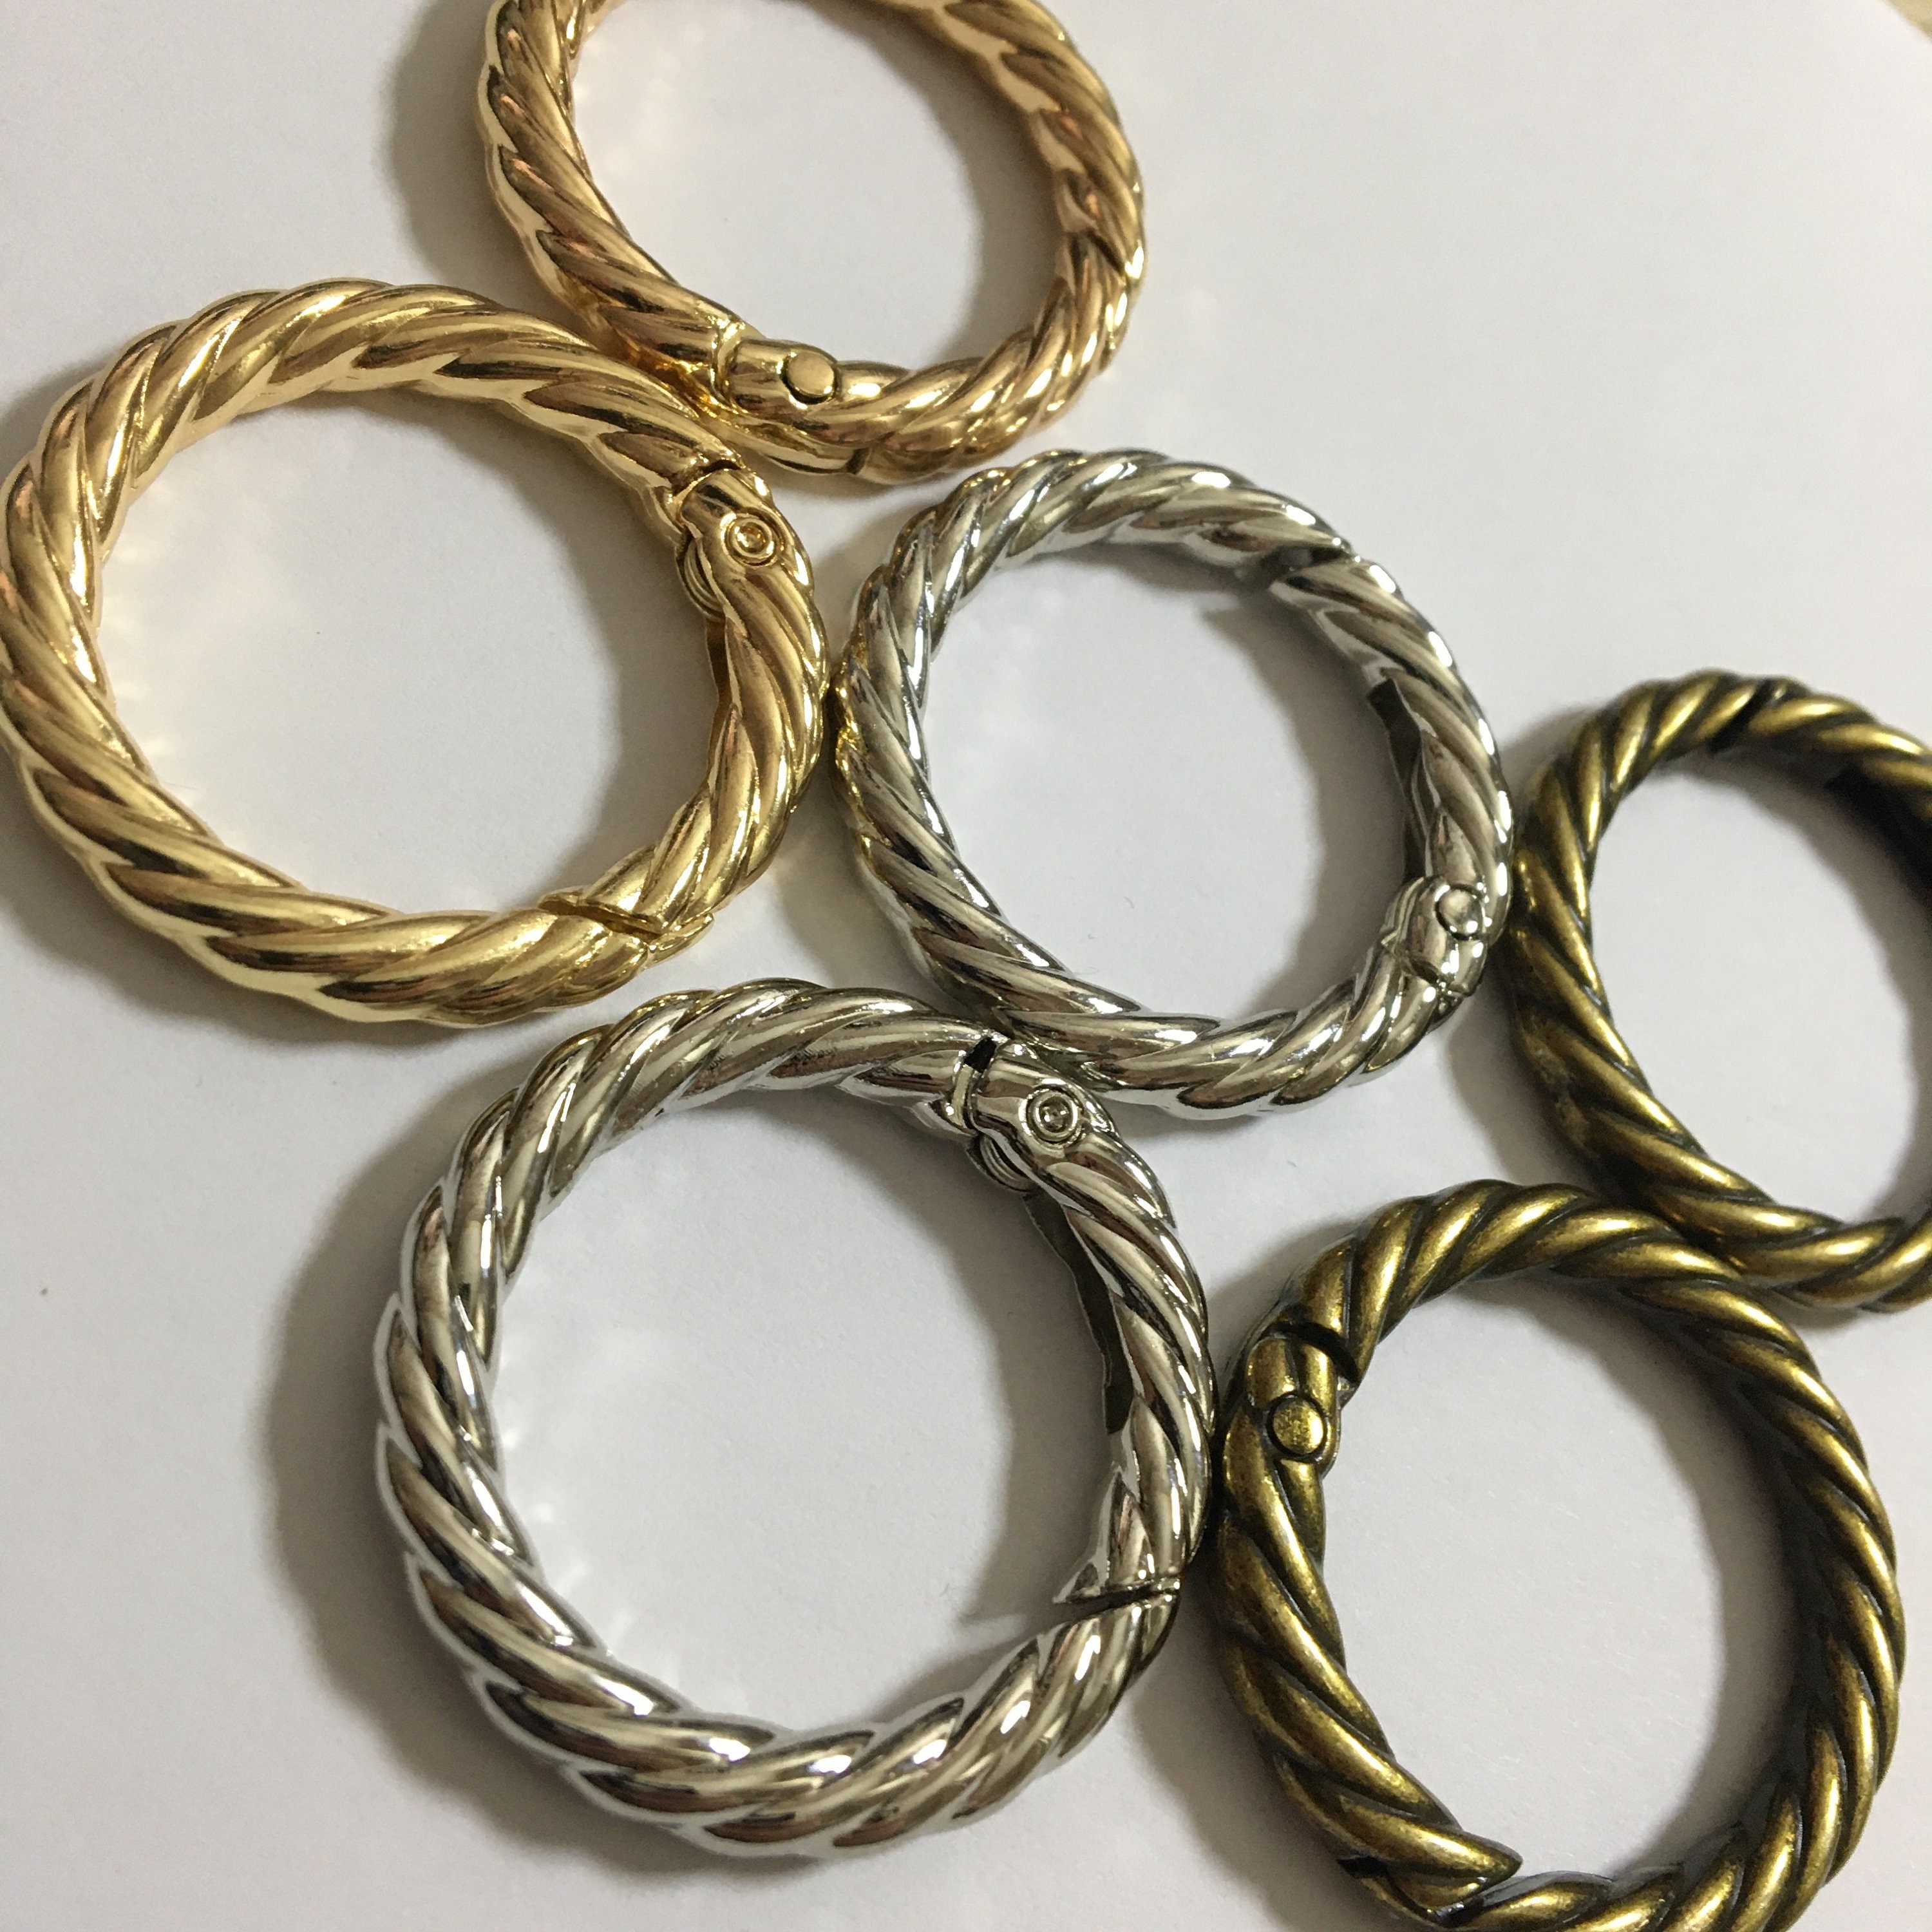 Chain Clasp 120pcs Bracelet Clasp With 840 Bending Rings Chain Clasps  Jewellery Clasp Carabiner Clasp Clasps For Jewellery Making